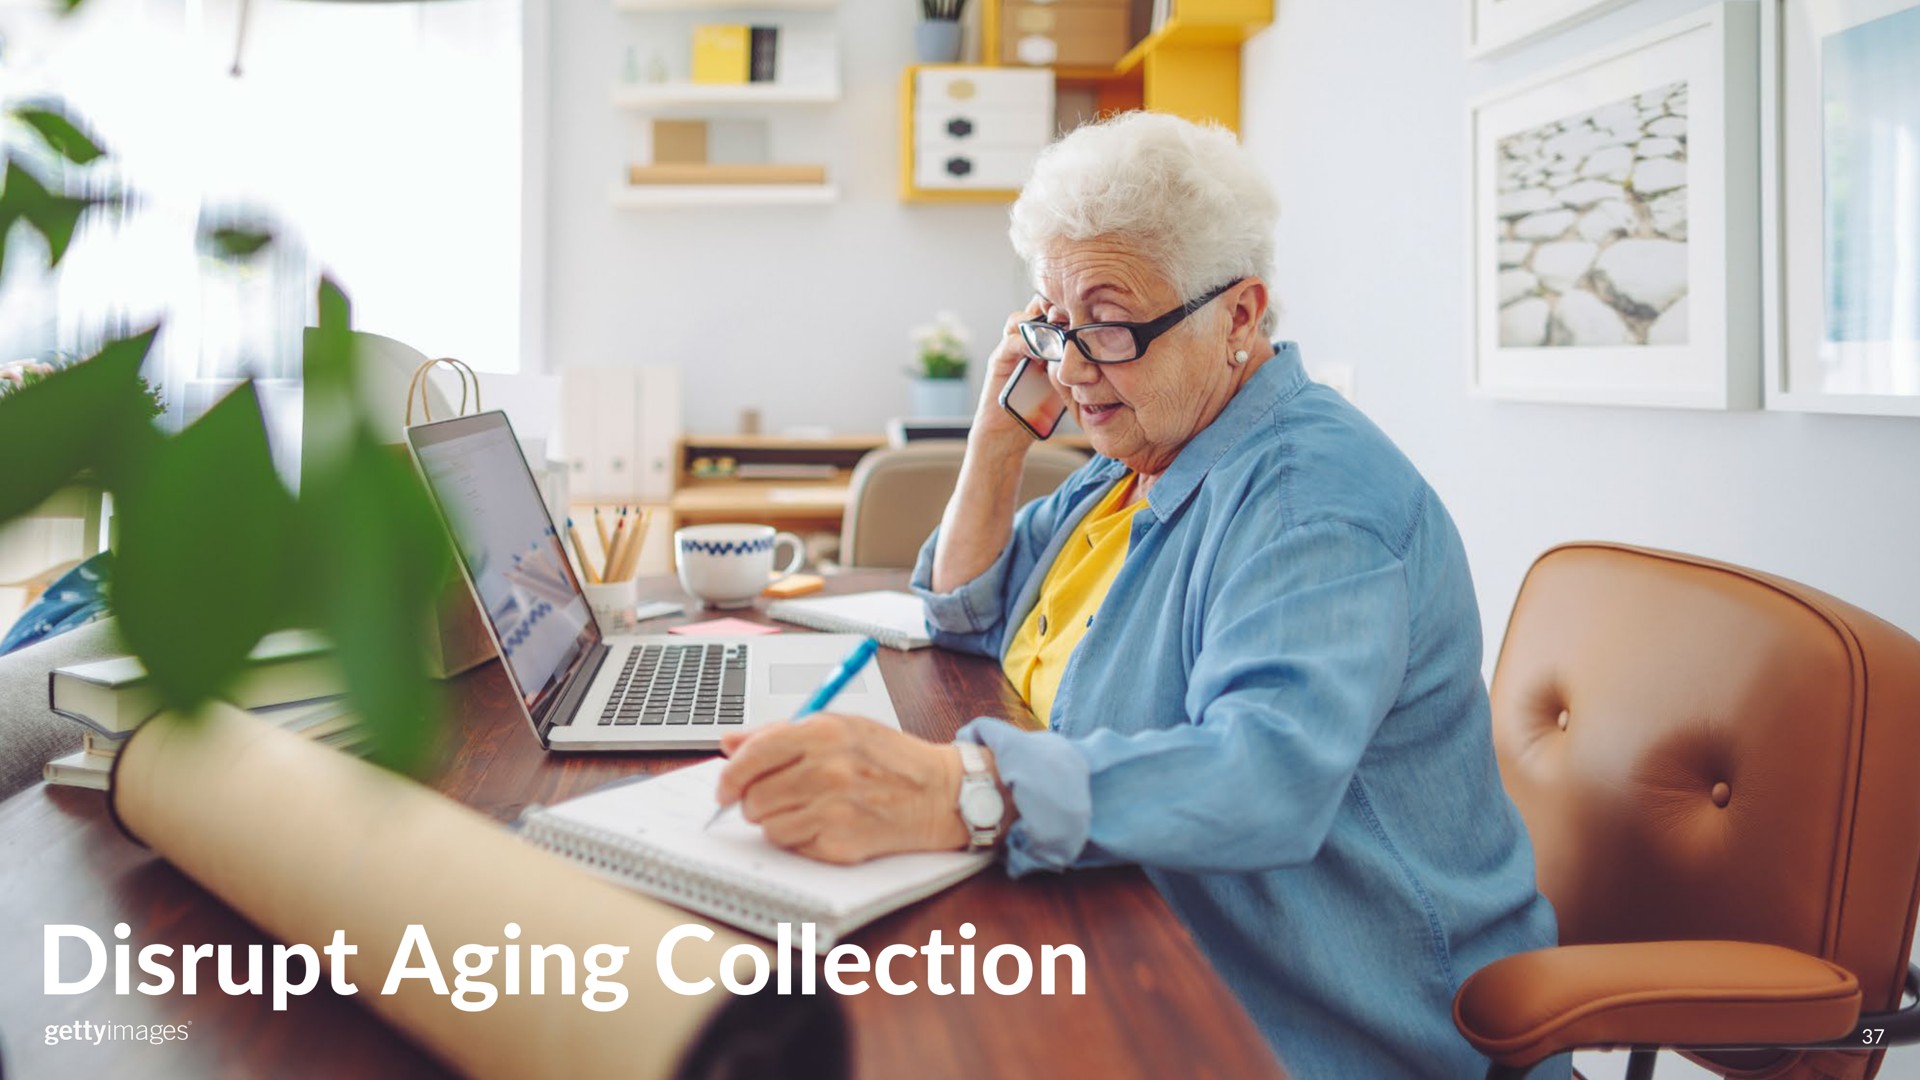 disrupt aging collection | Getty